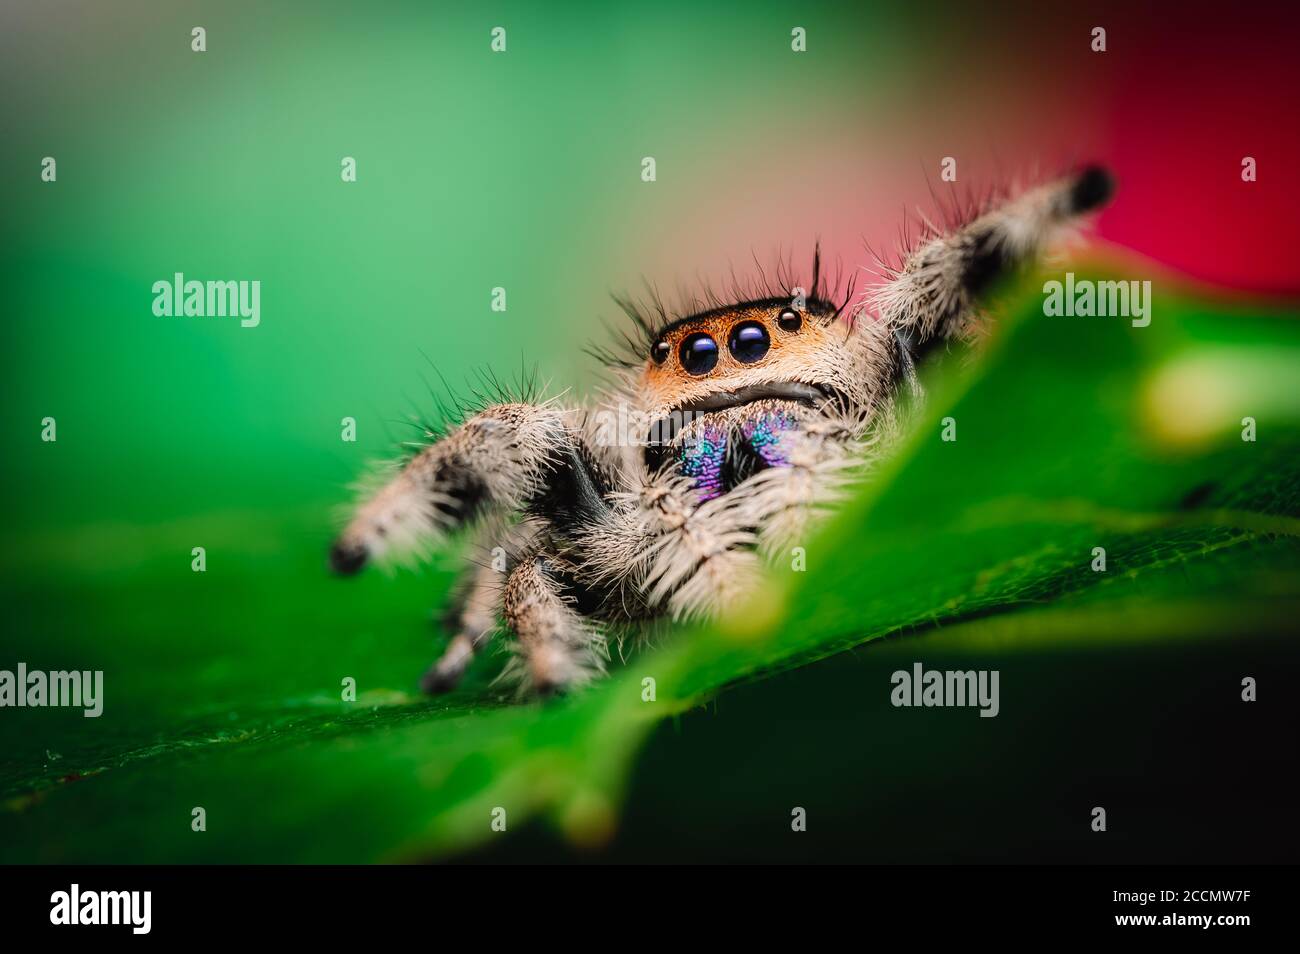 Female jumping spider (Phidippus regius) crawling on a green leaf. Autumn warm colors, macro, sharp details. Beautiful huge eyes are looking at the ca Stock Photo